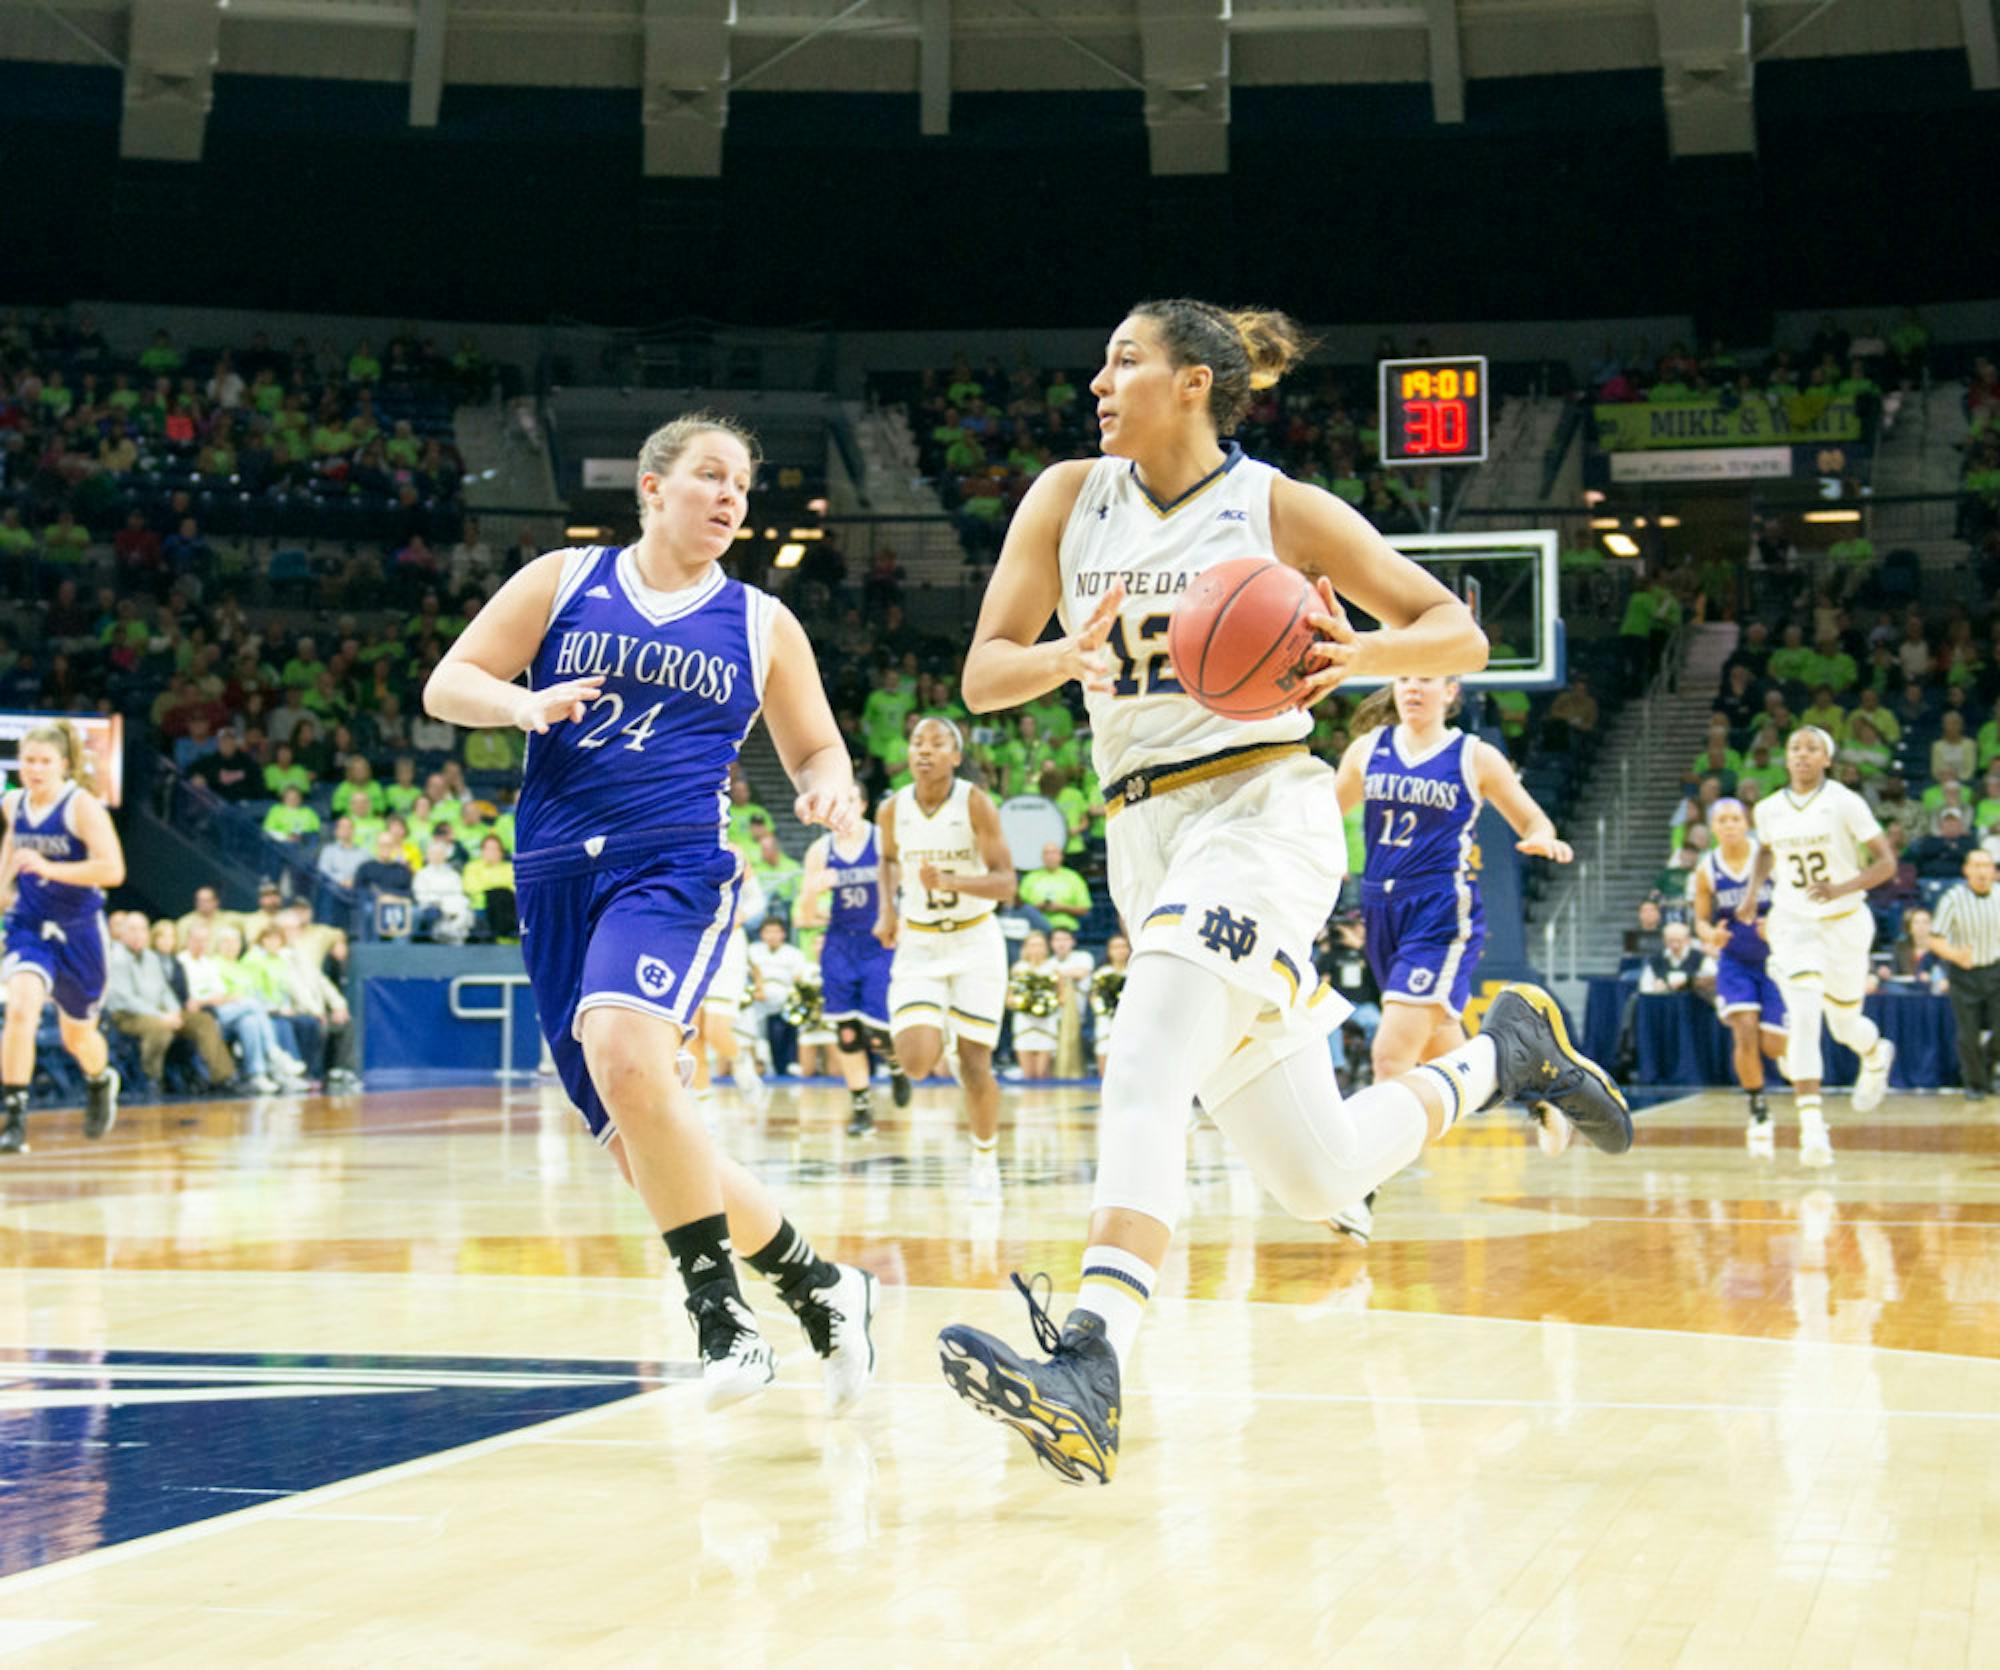 Irish sophomore forward Taya Reimer drives during Notre Dame’s 104-29 win over Holy Cross  on Nov. 23 at Purcell Pavilion.